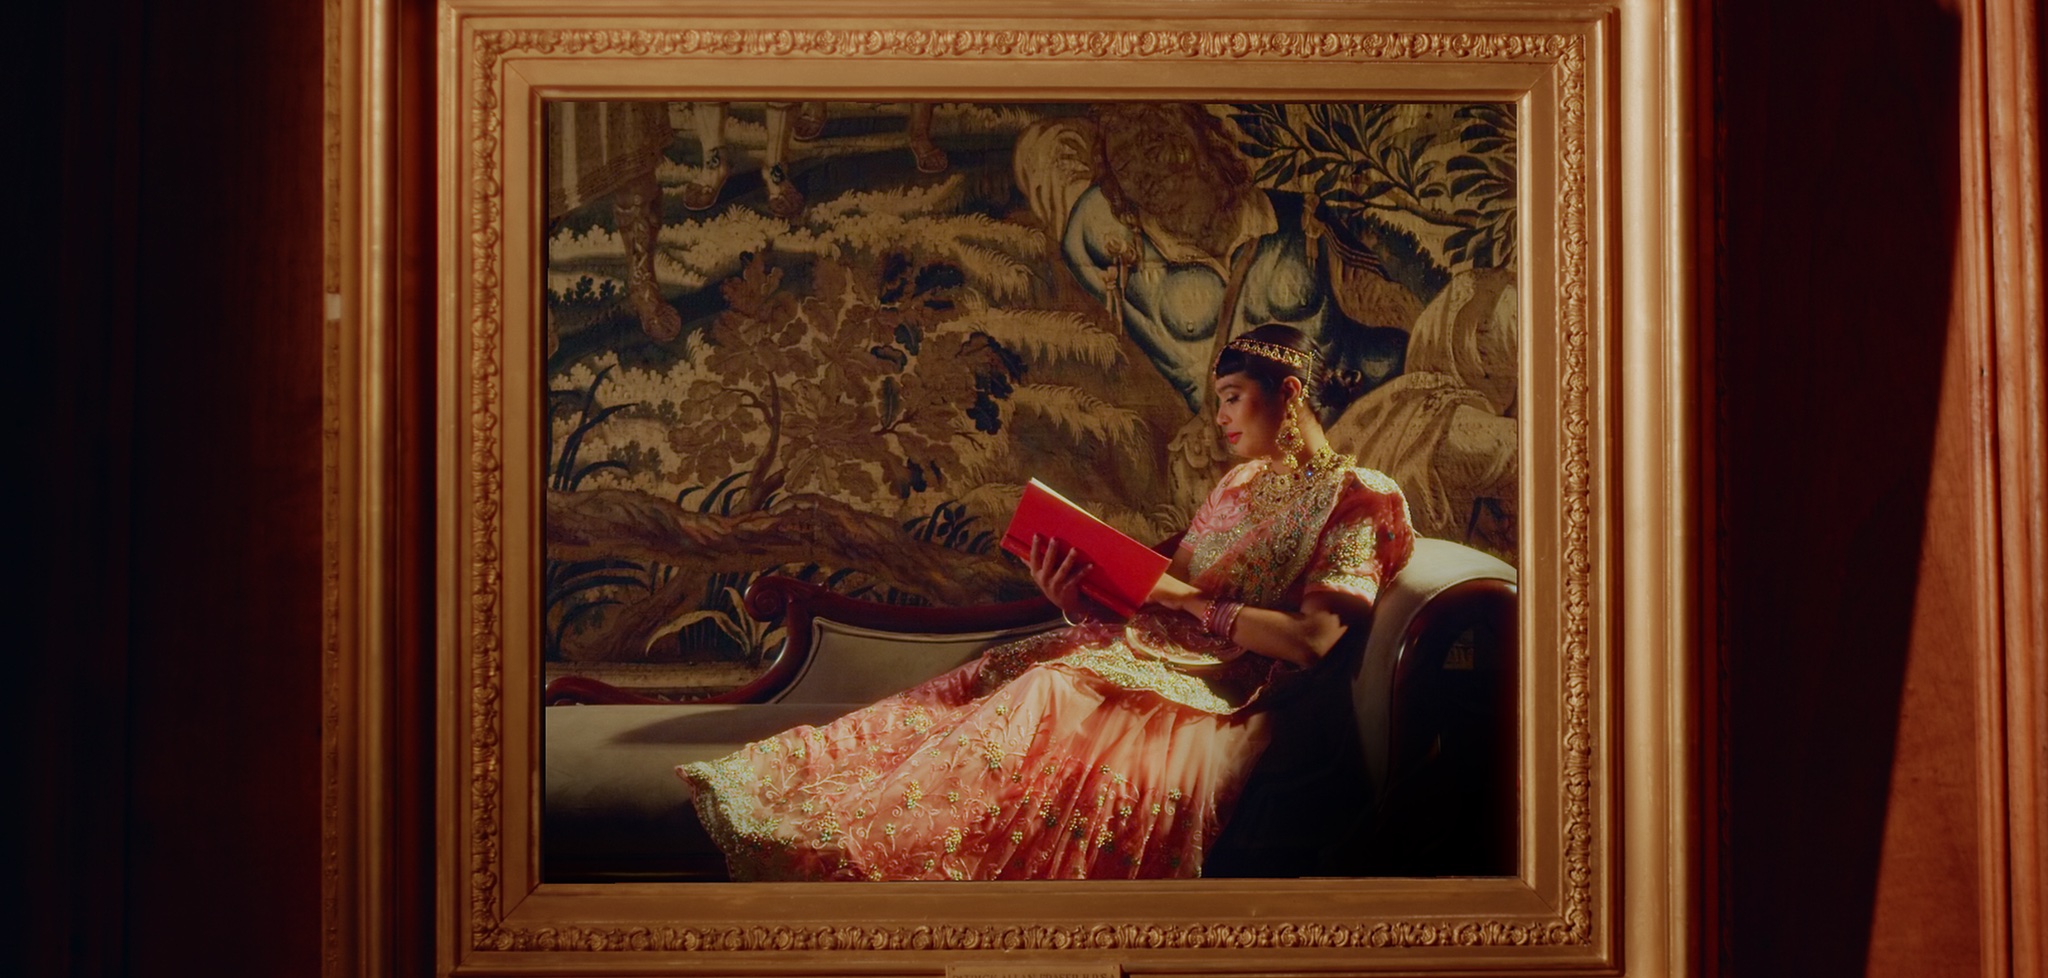 Picture frame showing person relaxing with book, set against richly decorated tapestry.